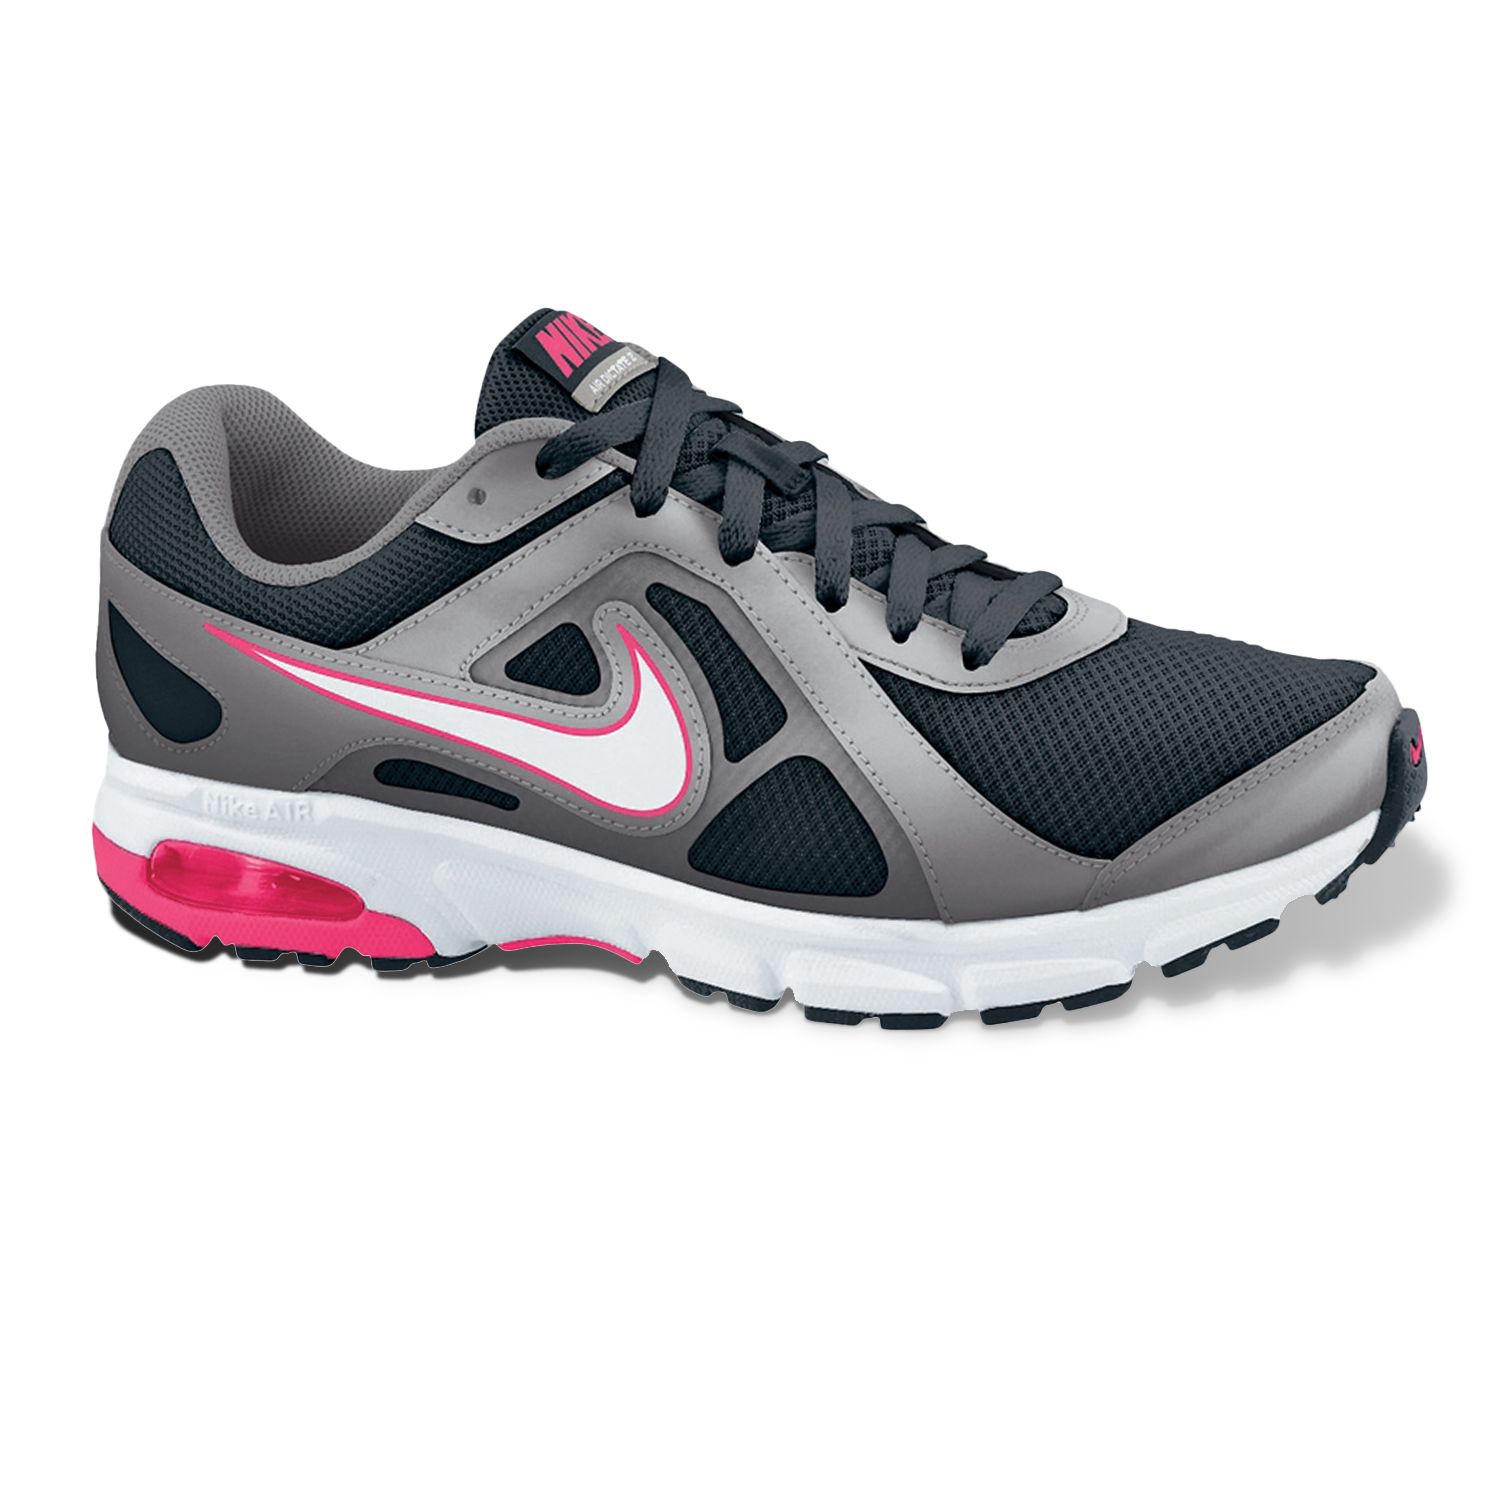 Nike Air Dictate 2 Women's Running Shoes